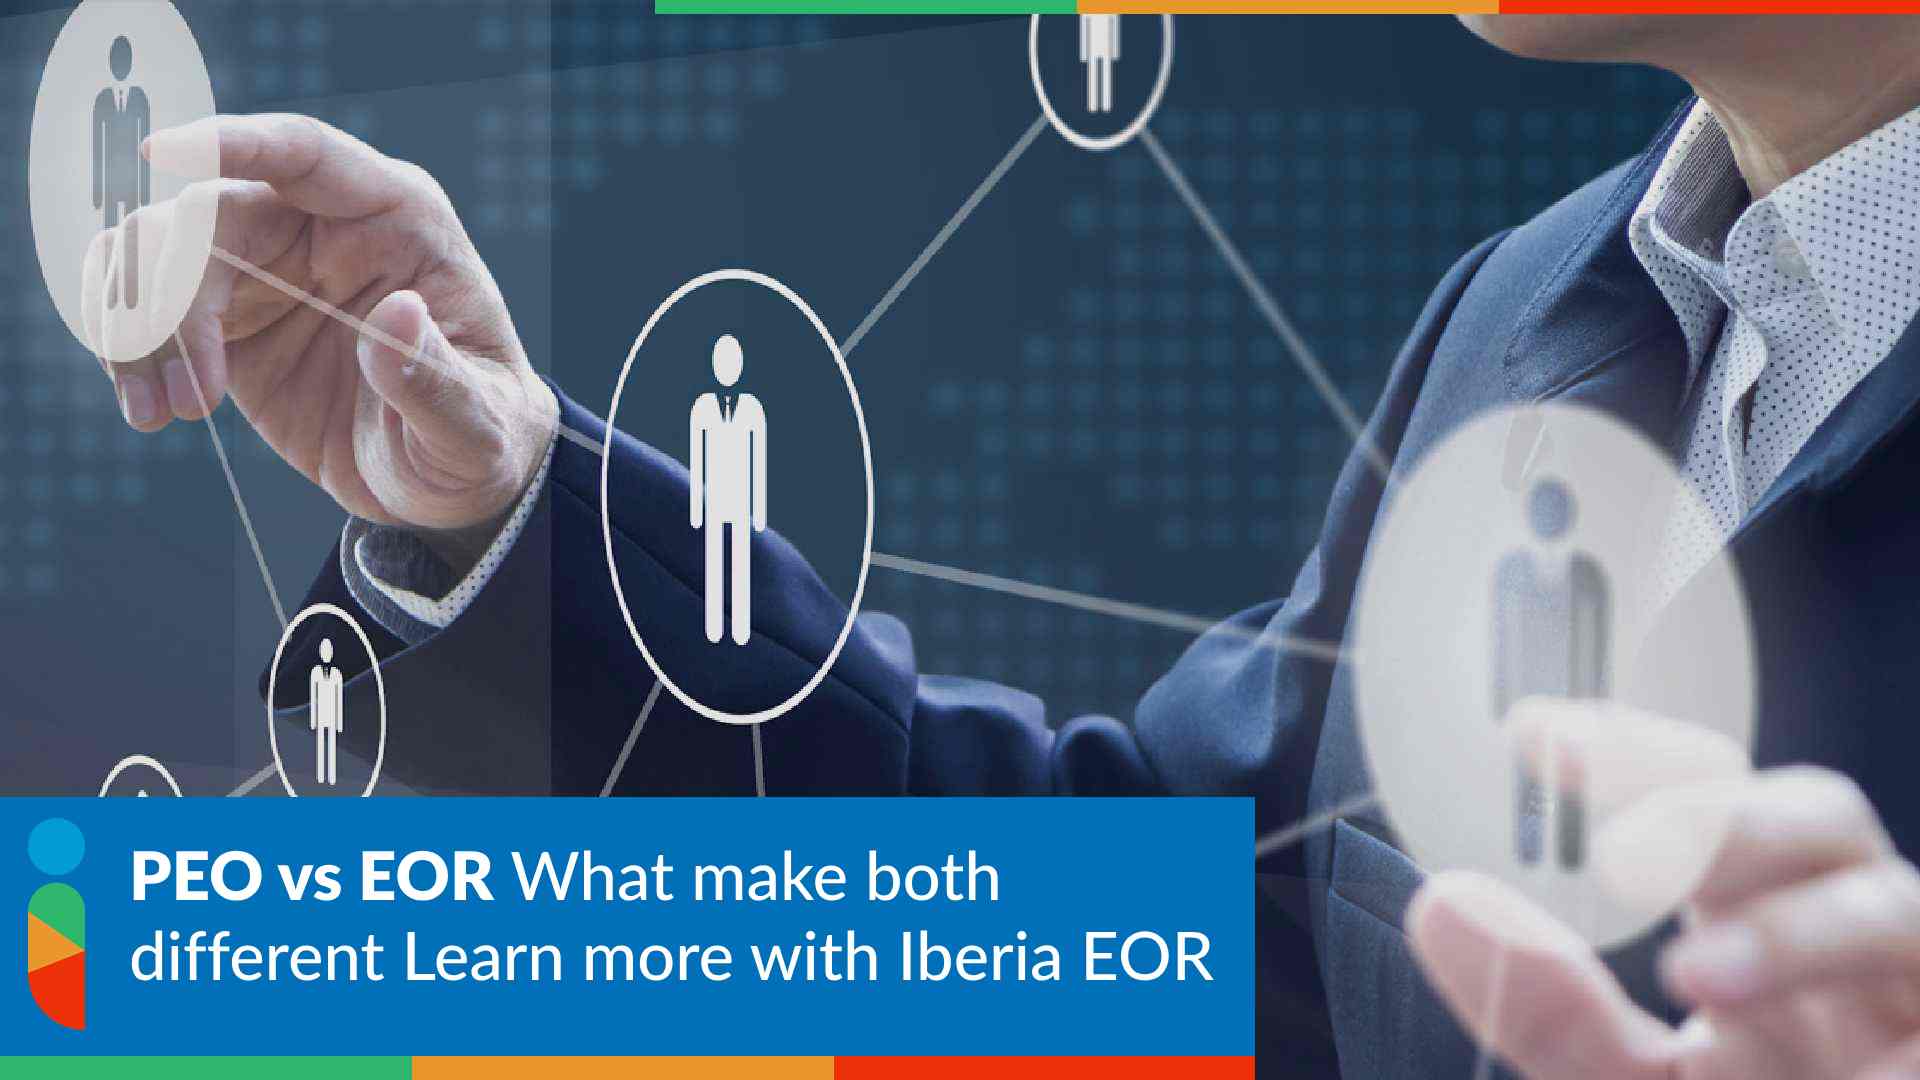 PEO vs EOR What make both different Learn more with Iberia EOR